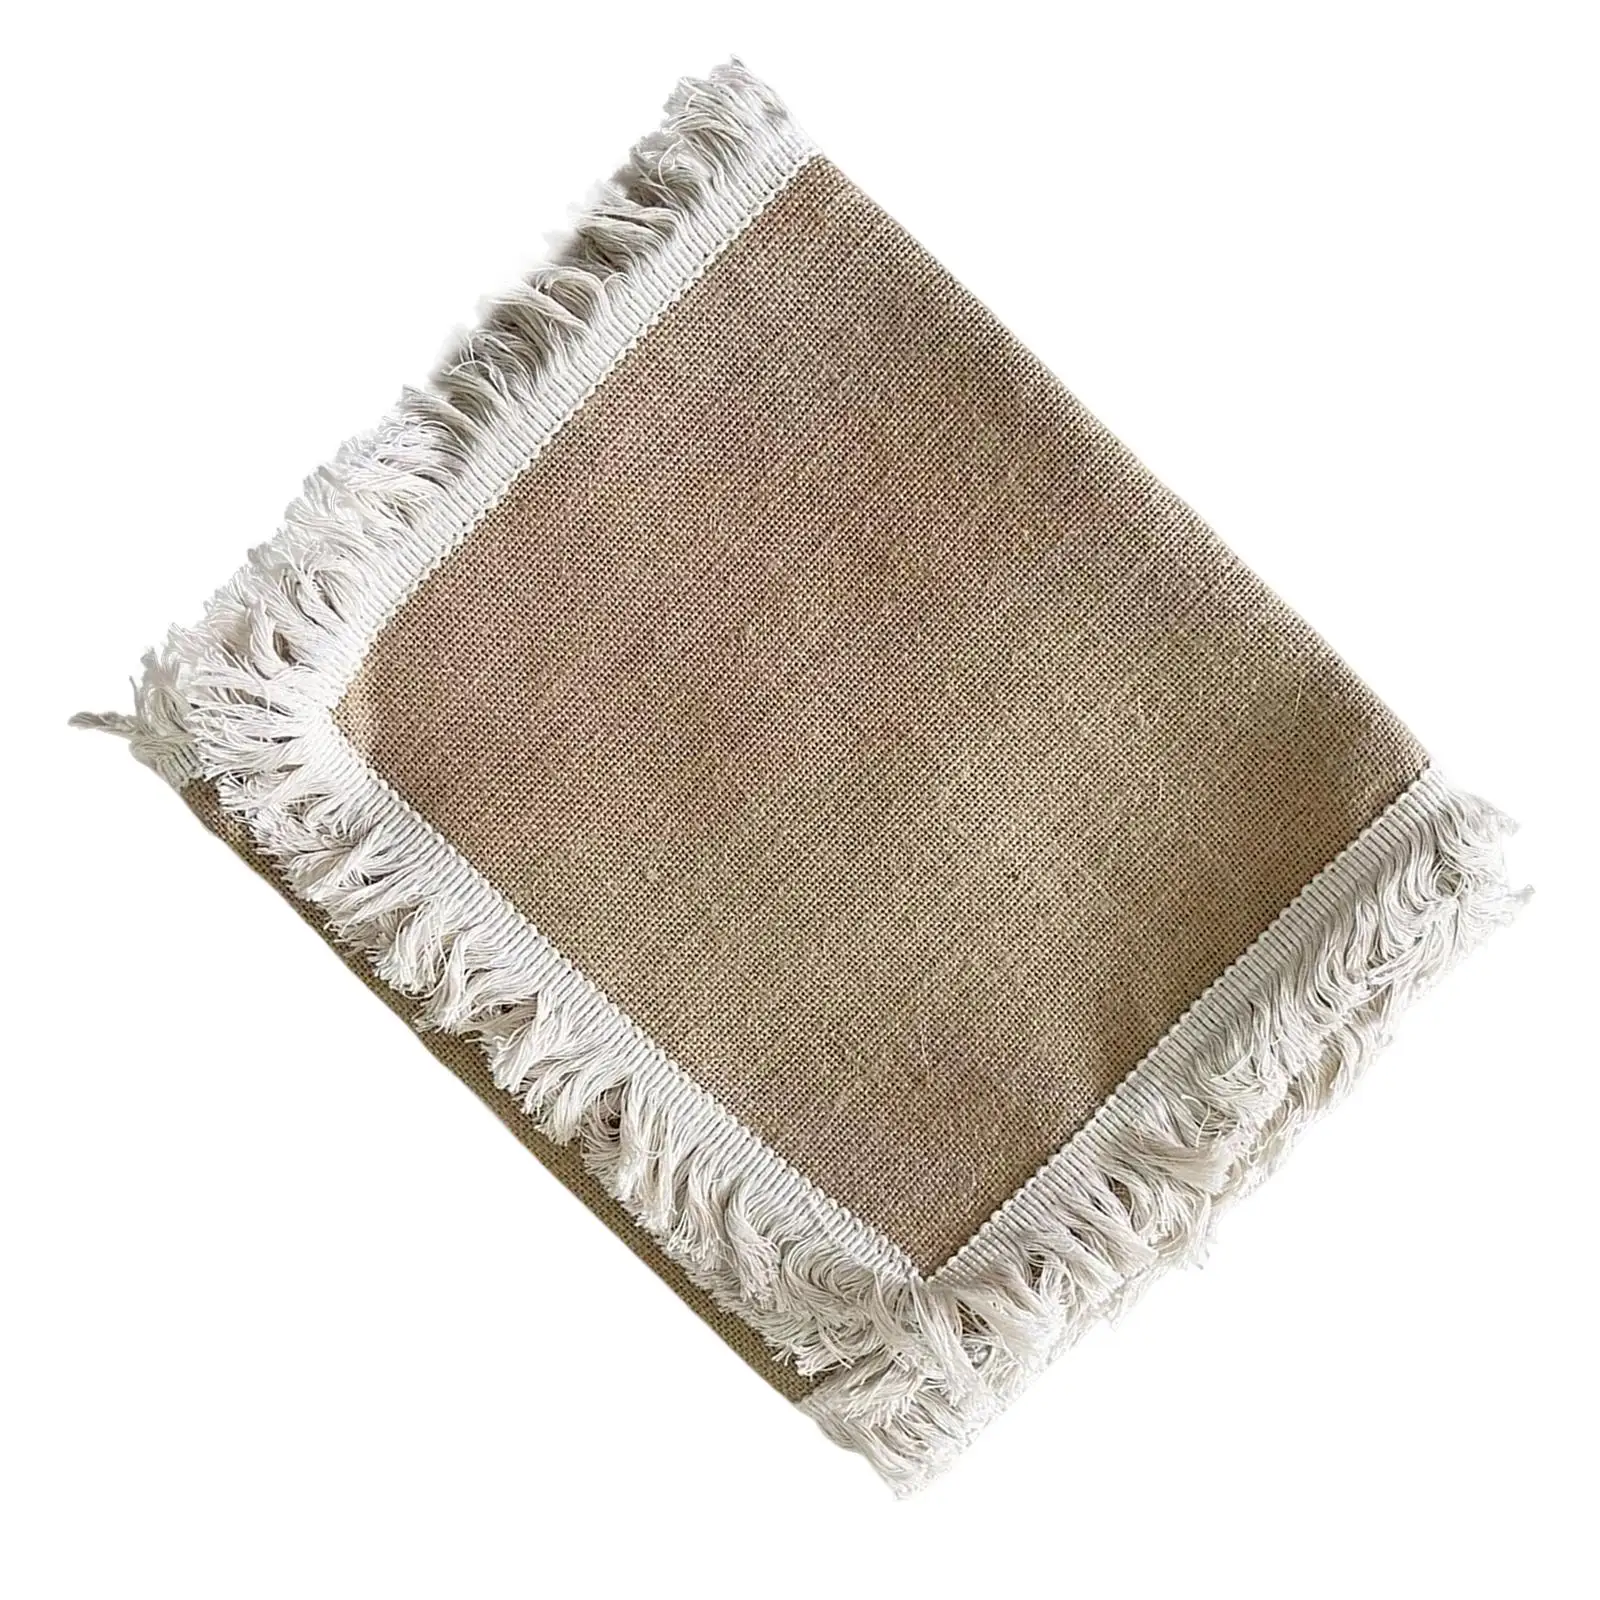 Table Runner with Tassel Breathable Handmade Woven Table Cloth Romantic Atmosphere Table Decoration for Home Kitchen Gardens